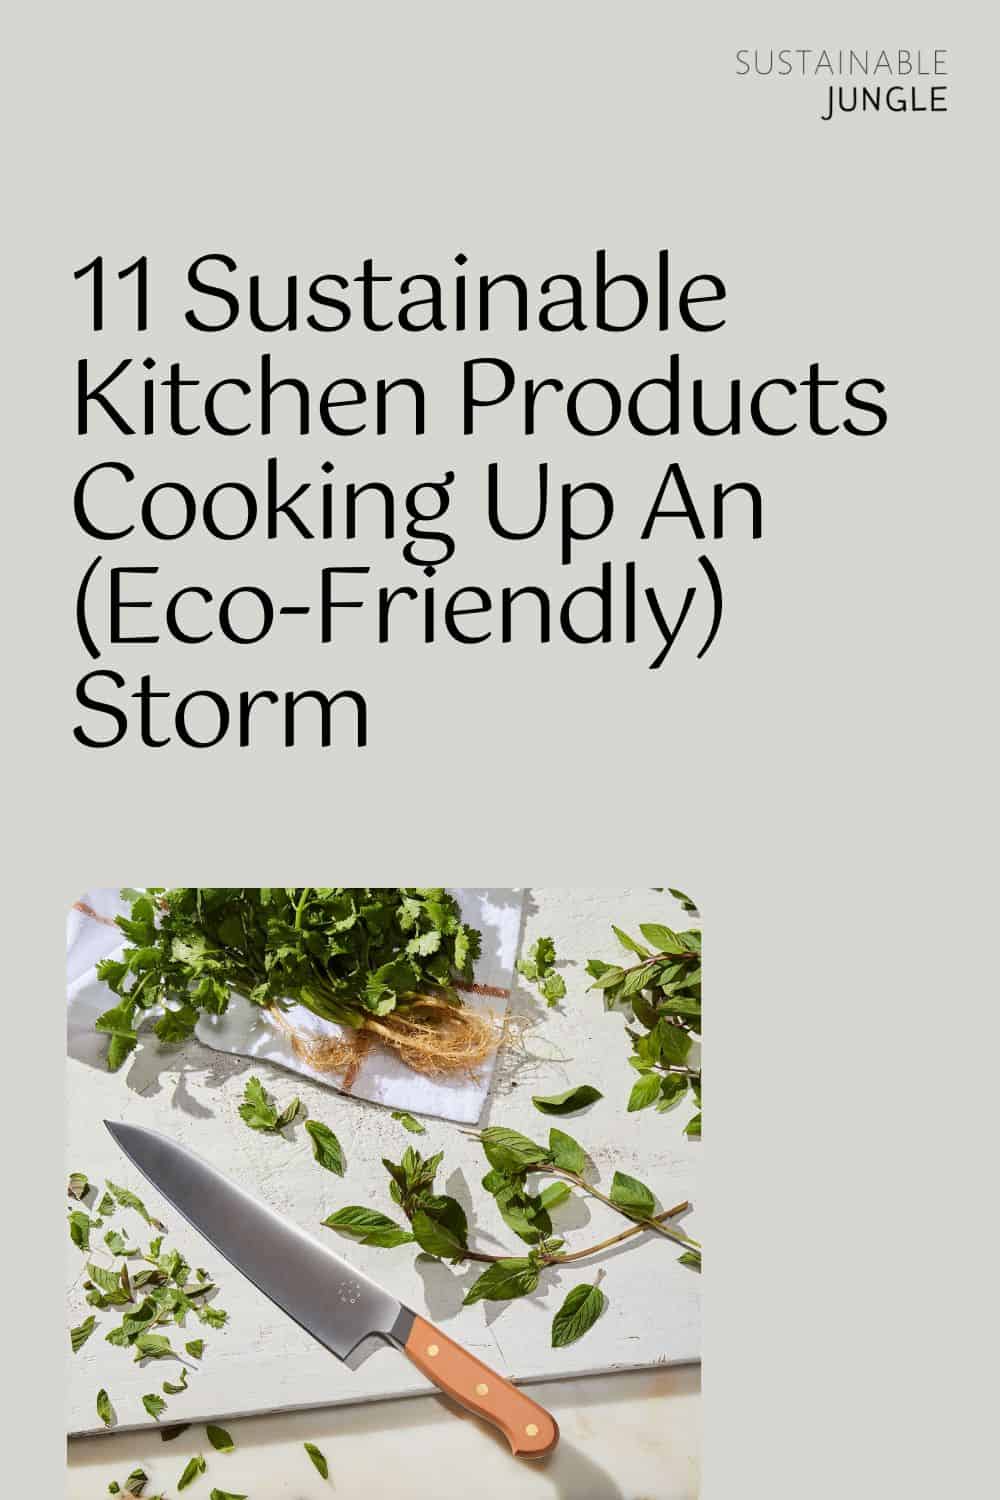 https://www.sustainablejungle.com/wp-content/uploads/2023/02/Sustainable-Kitchen-Products-2023-P1.jpg